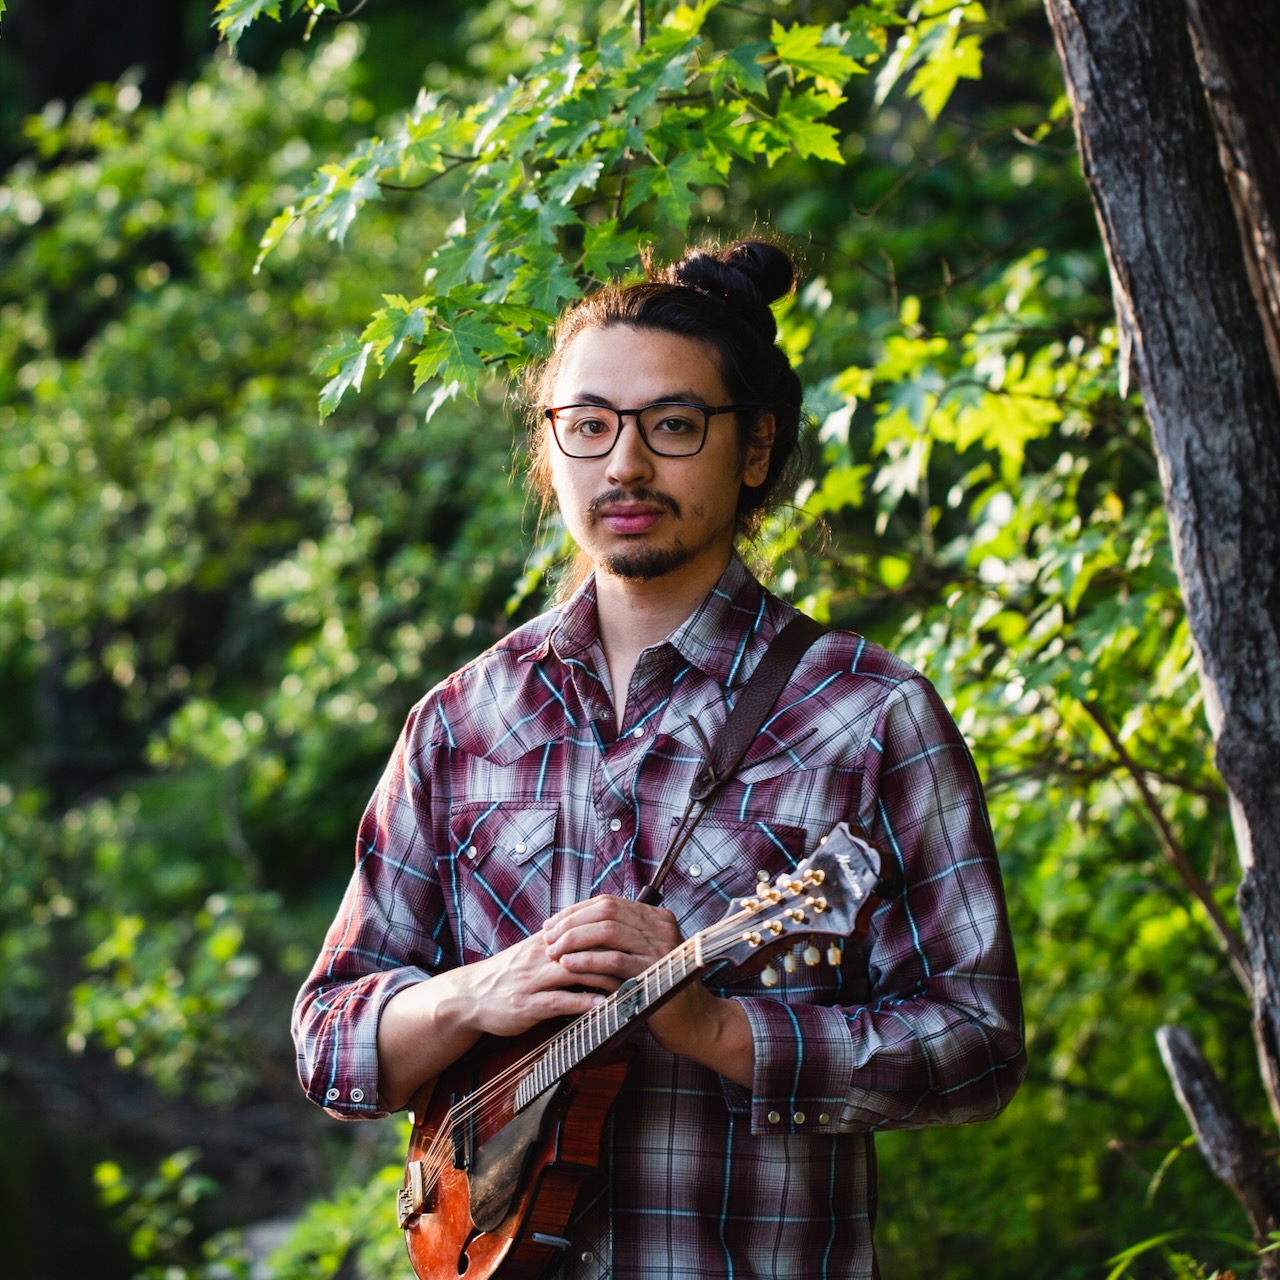 Japanese Musician Bosco Maintains the Tradition of Old-Time Fiddle and Banjo